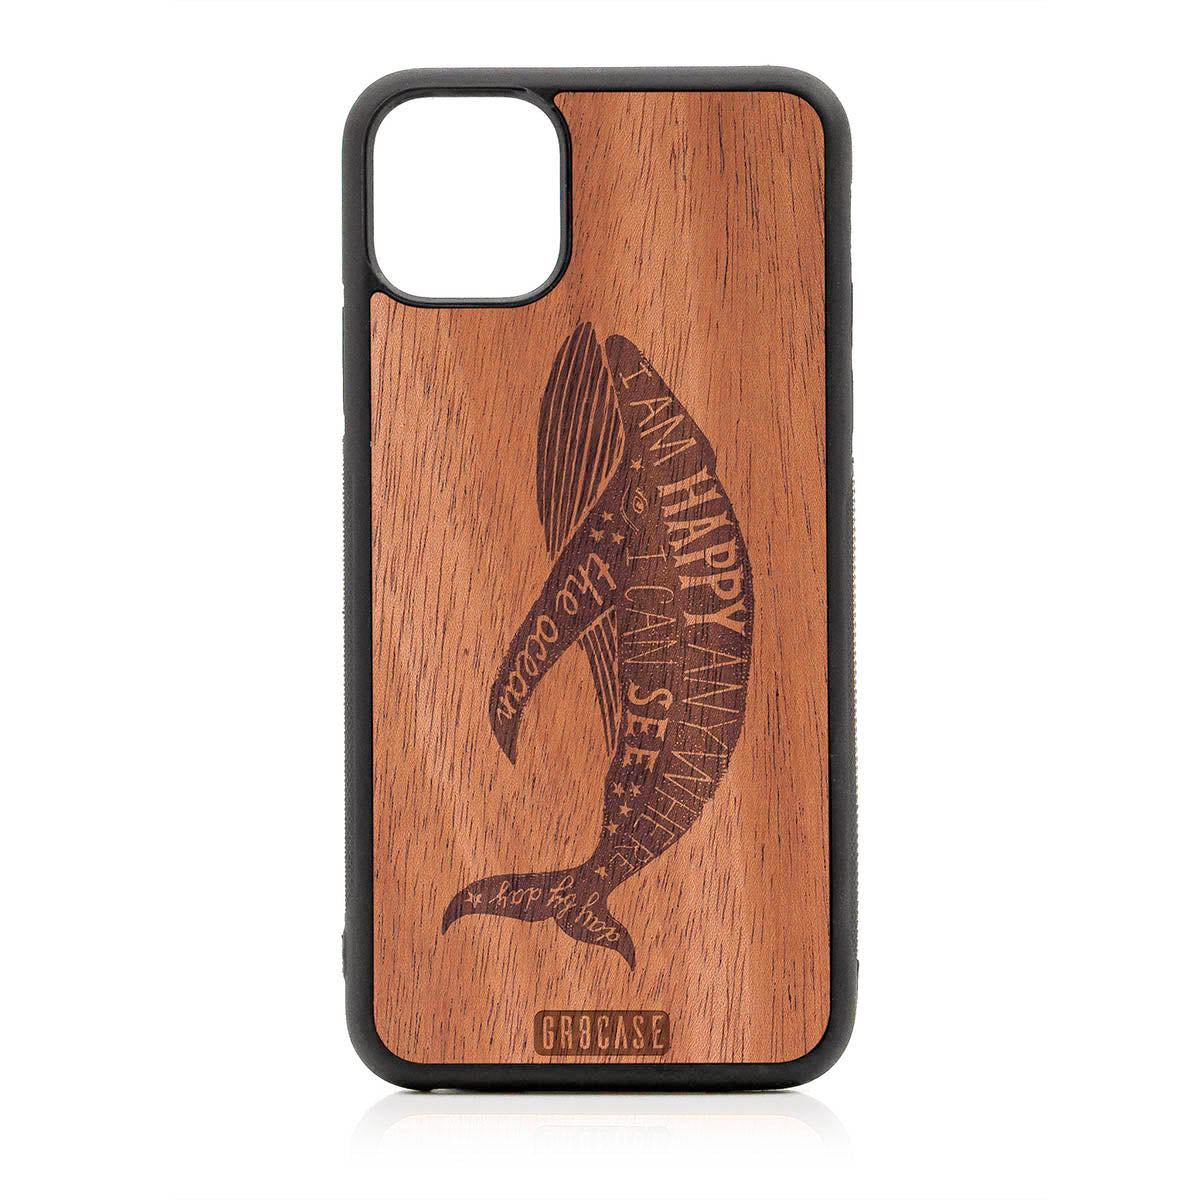 I'm Happy Anywhere I Can See The Ocean (Whale) Design Wood Case For iPhone 11 Pro Max